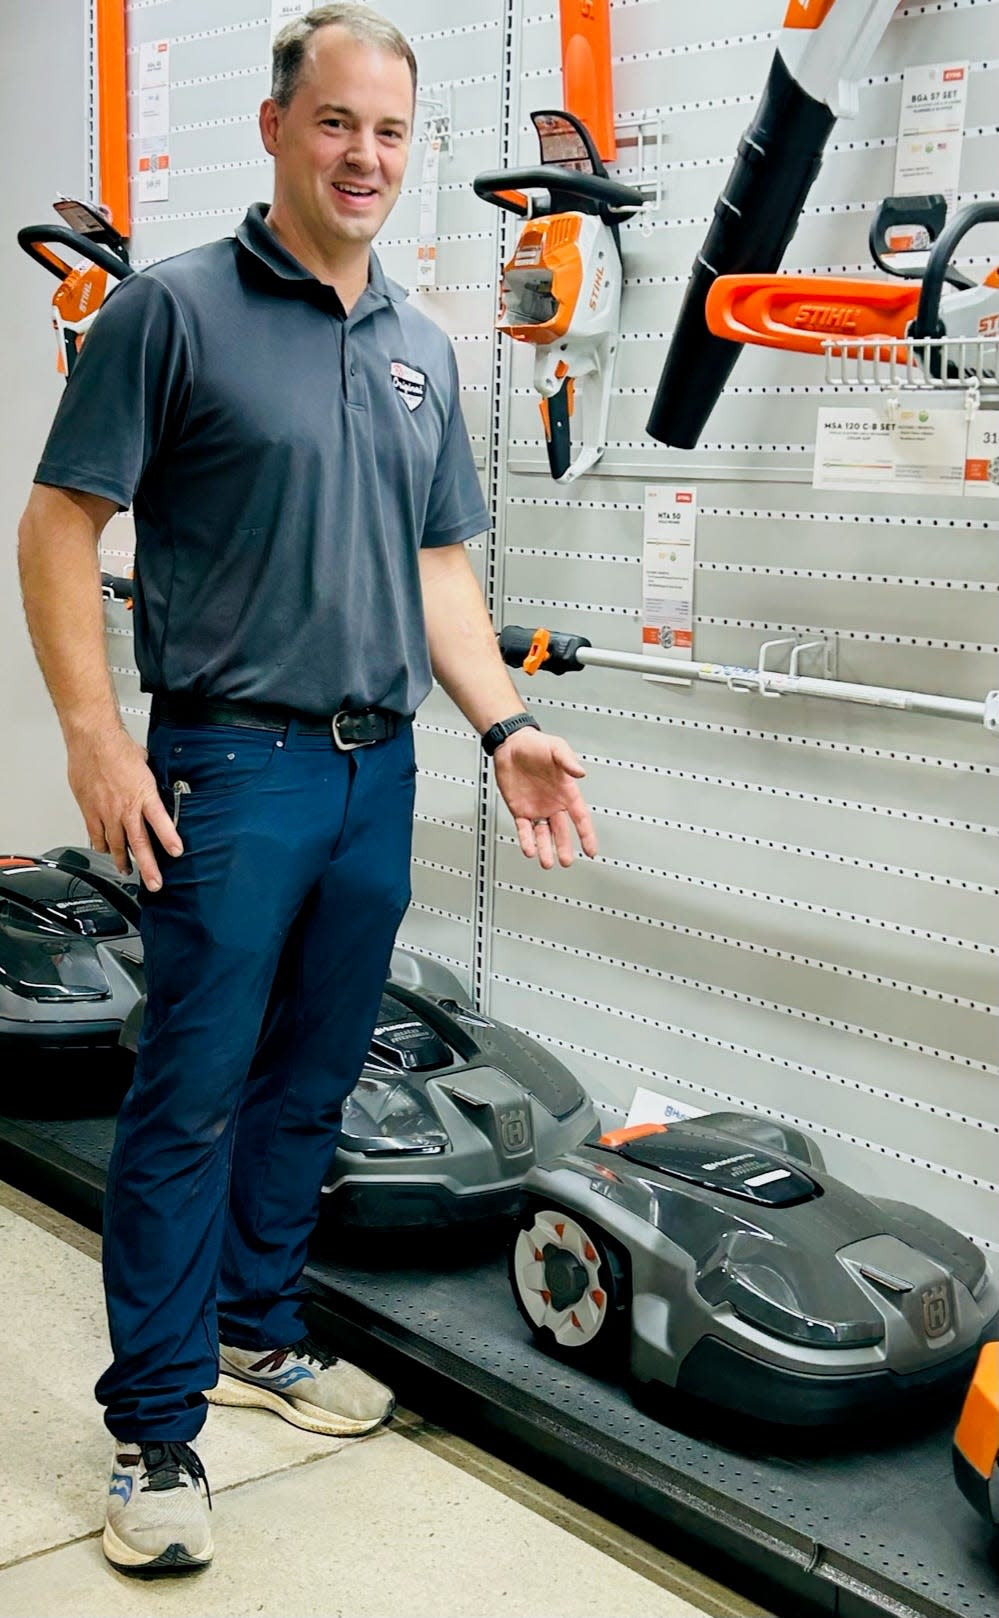 Ashley Day, owner of Laurelwood Equipment located in North Augusta, said there are benefits to owning a robot lawn mower.